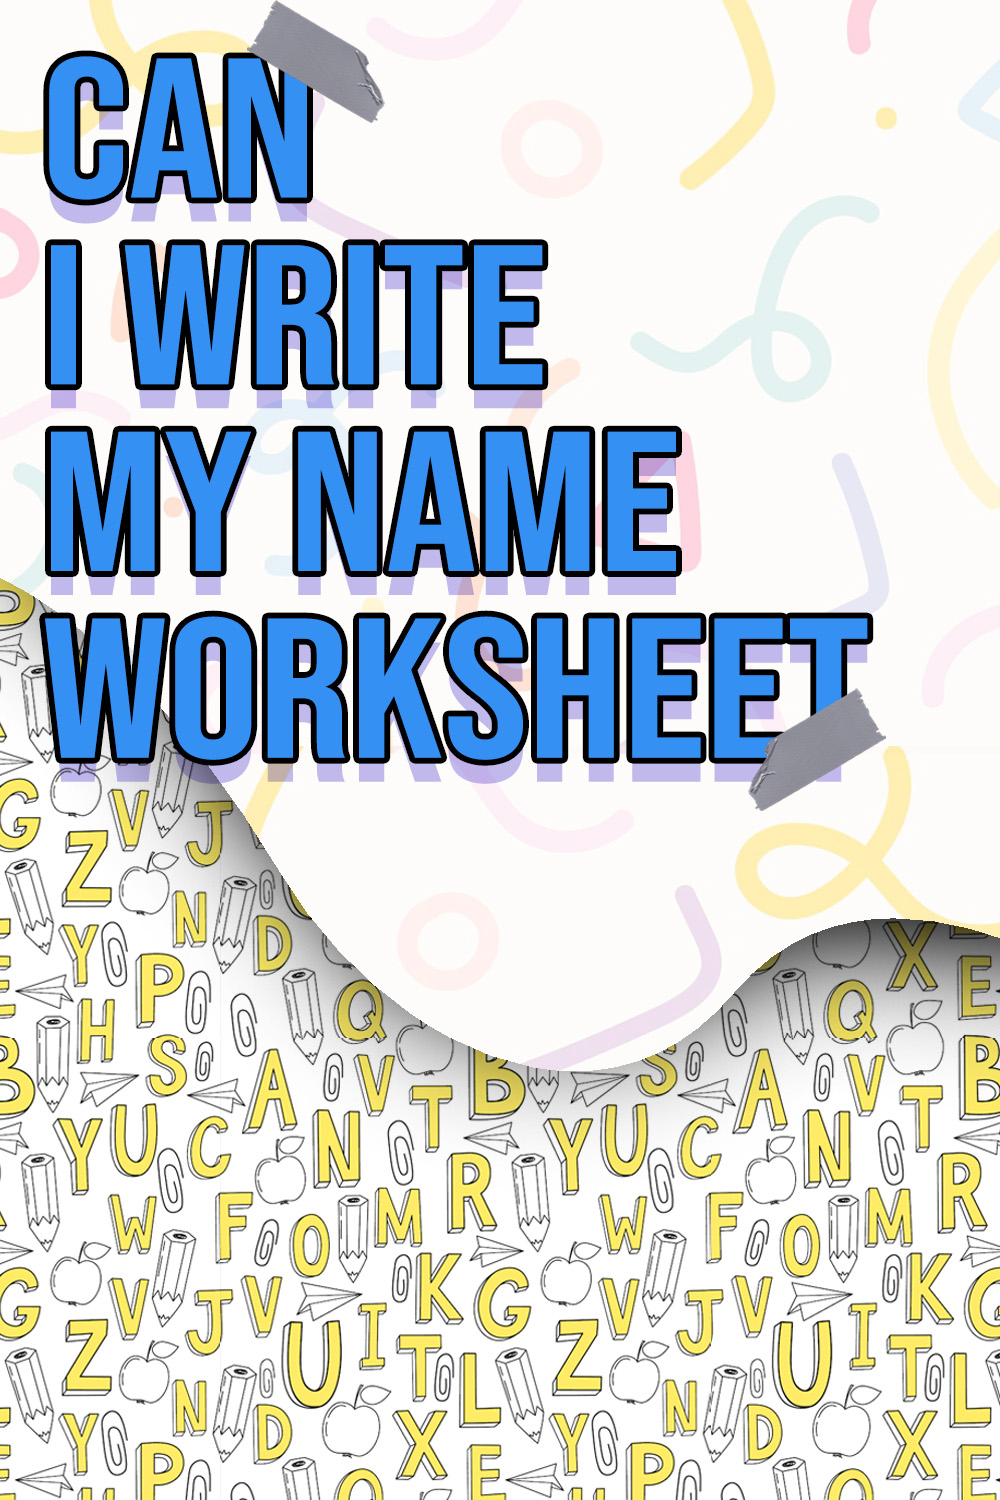 17 Images of Can I Write My Name Worksheet